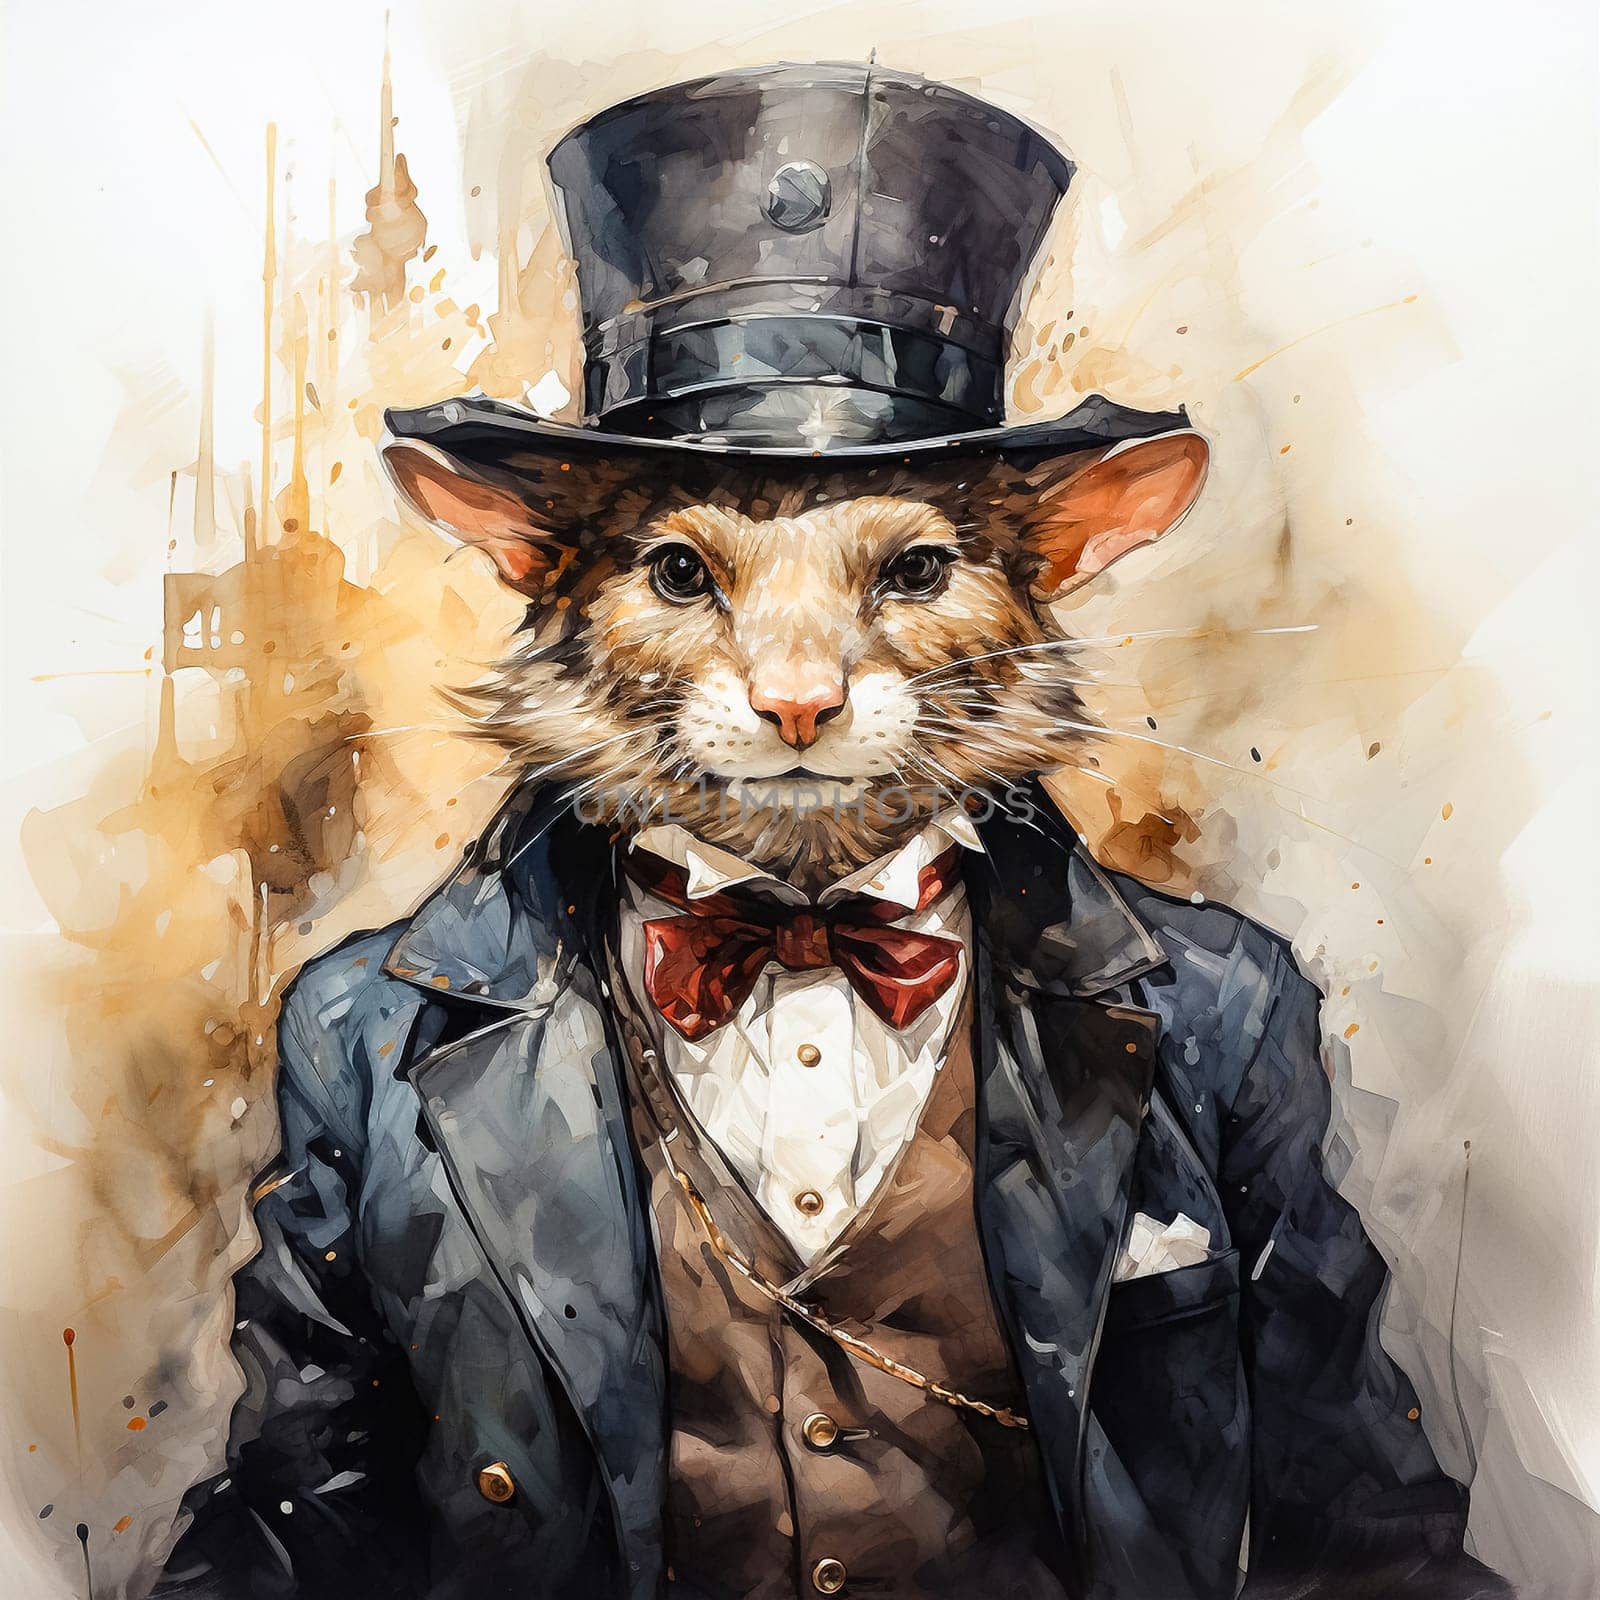 A business watercolor of a mouse in an elegant suit is a whimsical combination of the business world and natural charm, depicted with artistic flair.